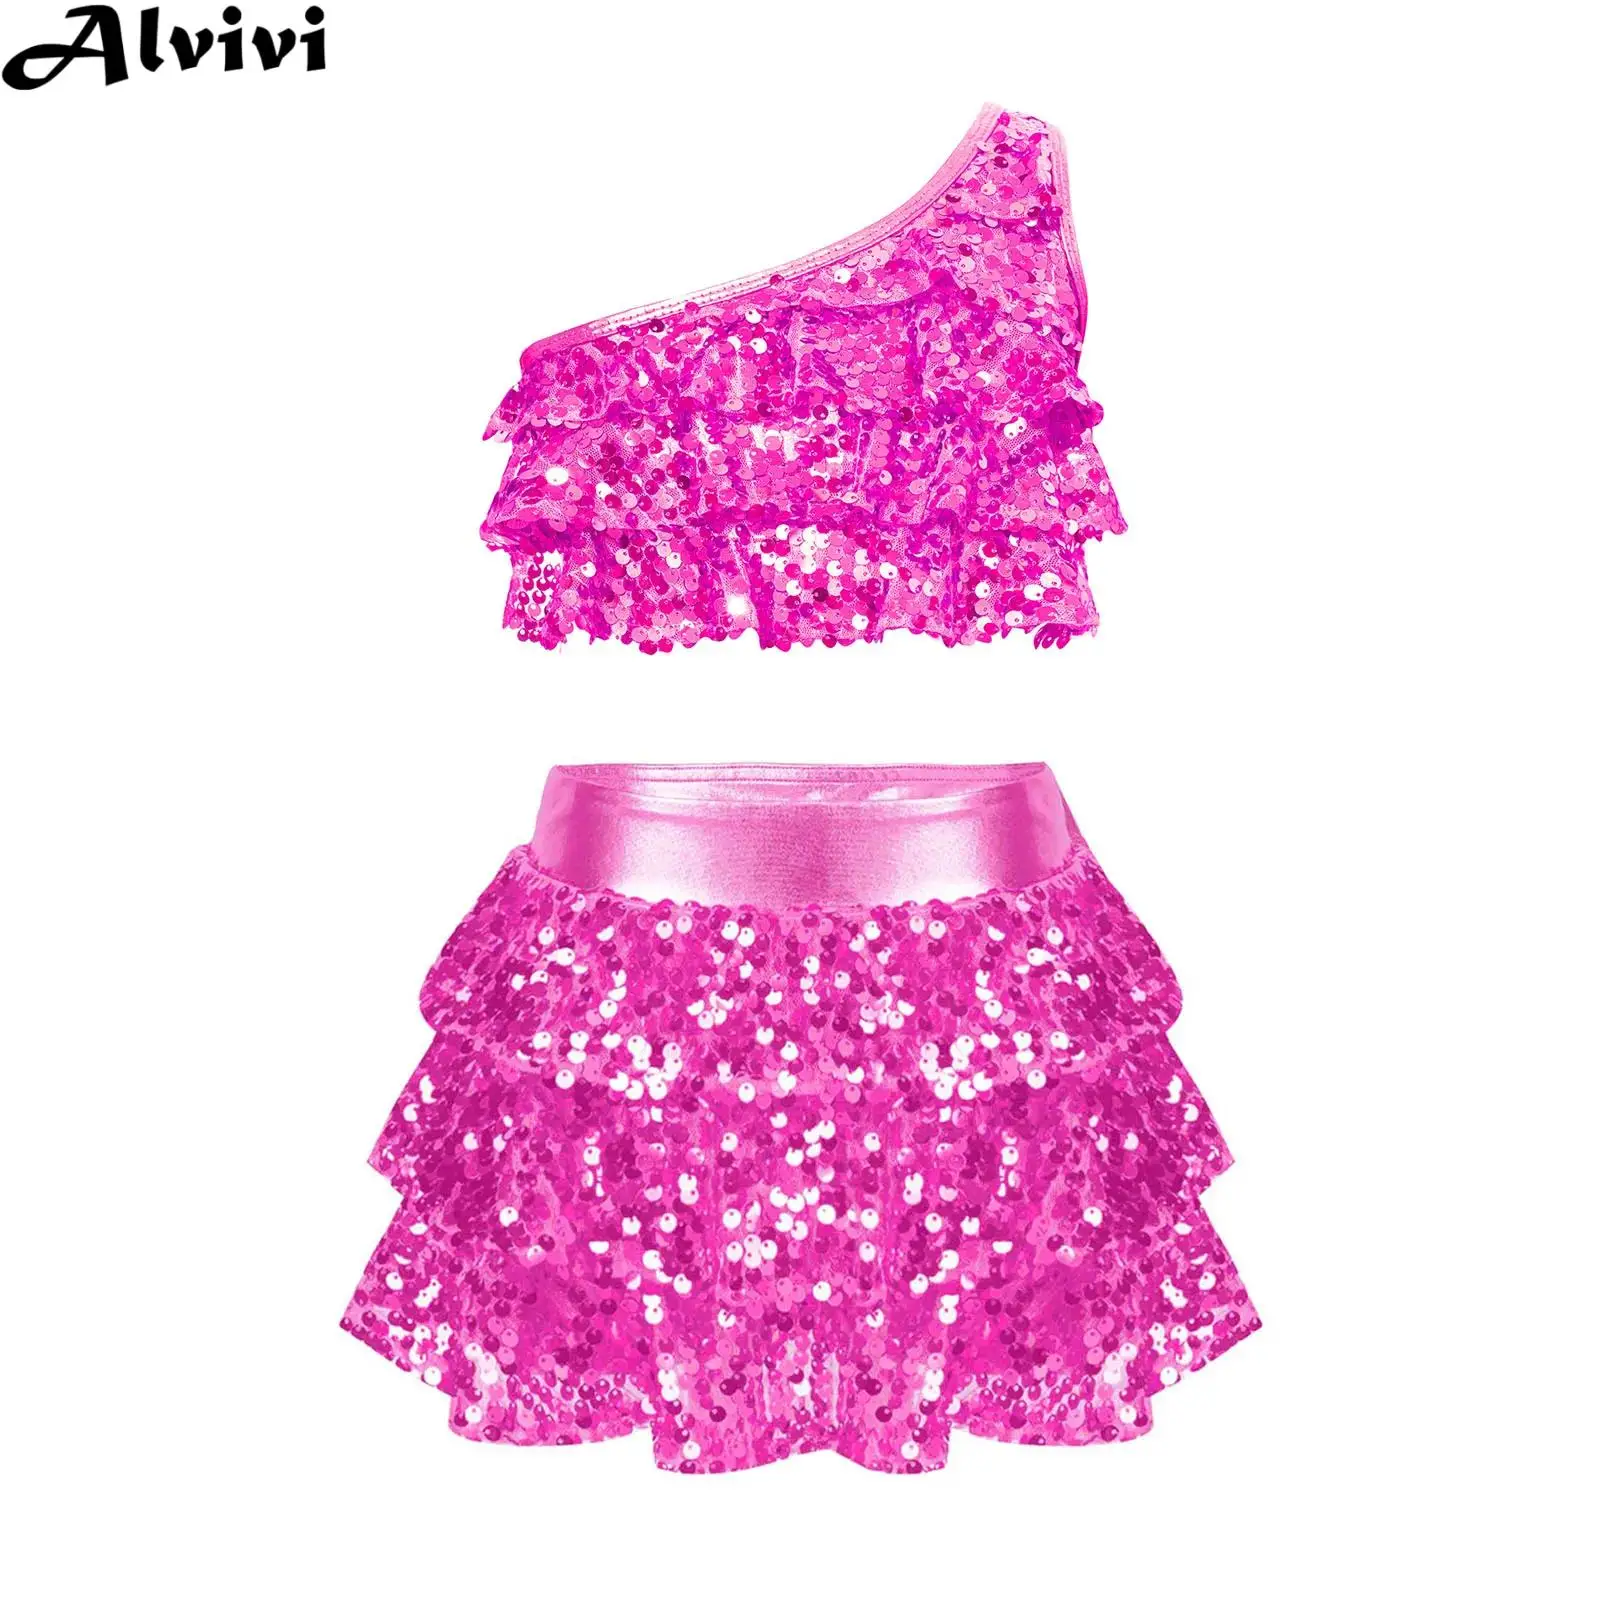 

Kids Girls Jazz Latin Dance Performance Costume Shiny Sequin One Shoulder Crop Top with Culottes Carnival Theme Party Dancewear